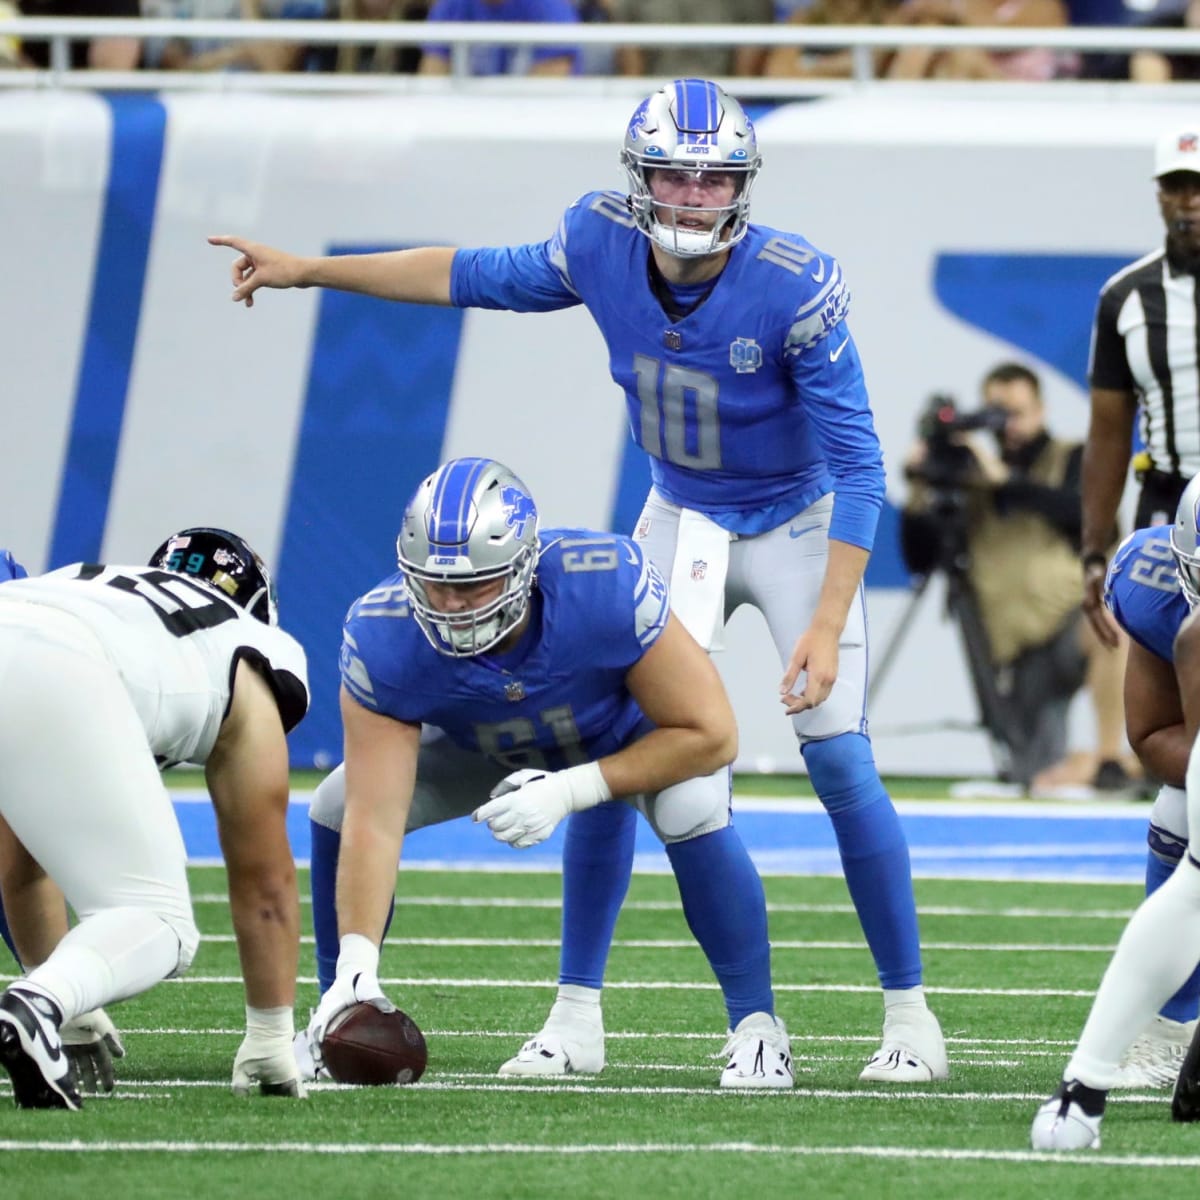 How to watch Lions vs. Jets online via NFL live stream in Week 15